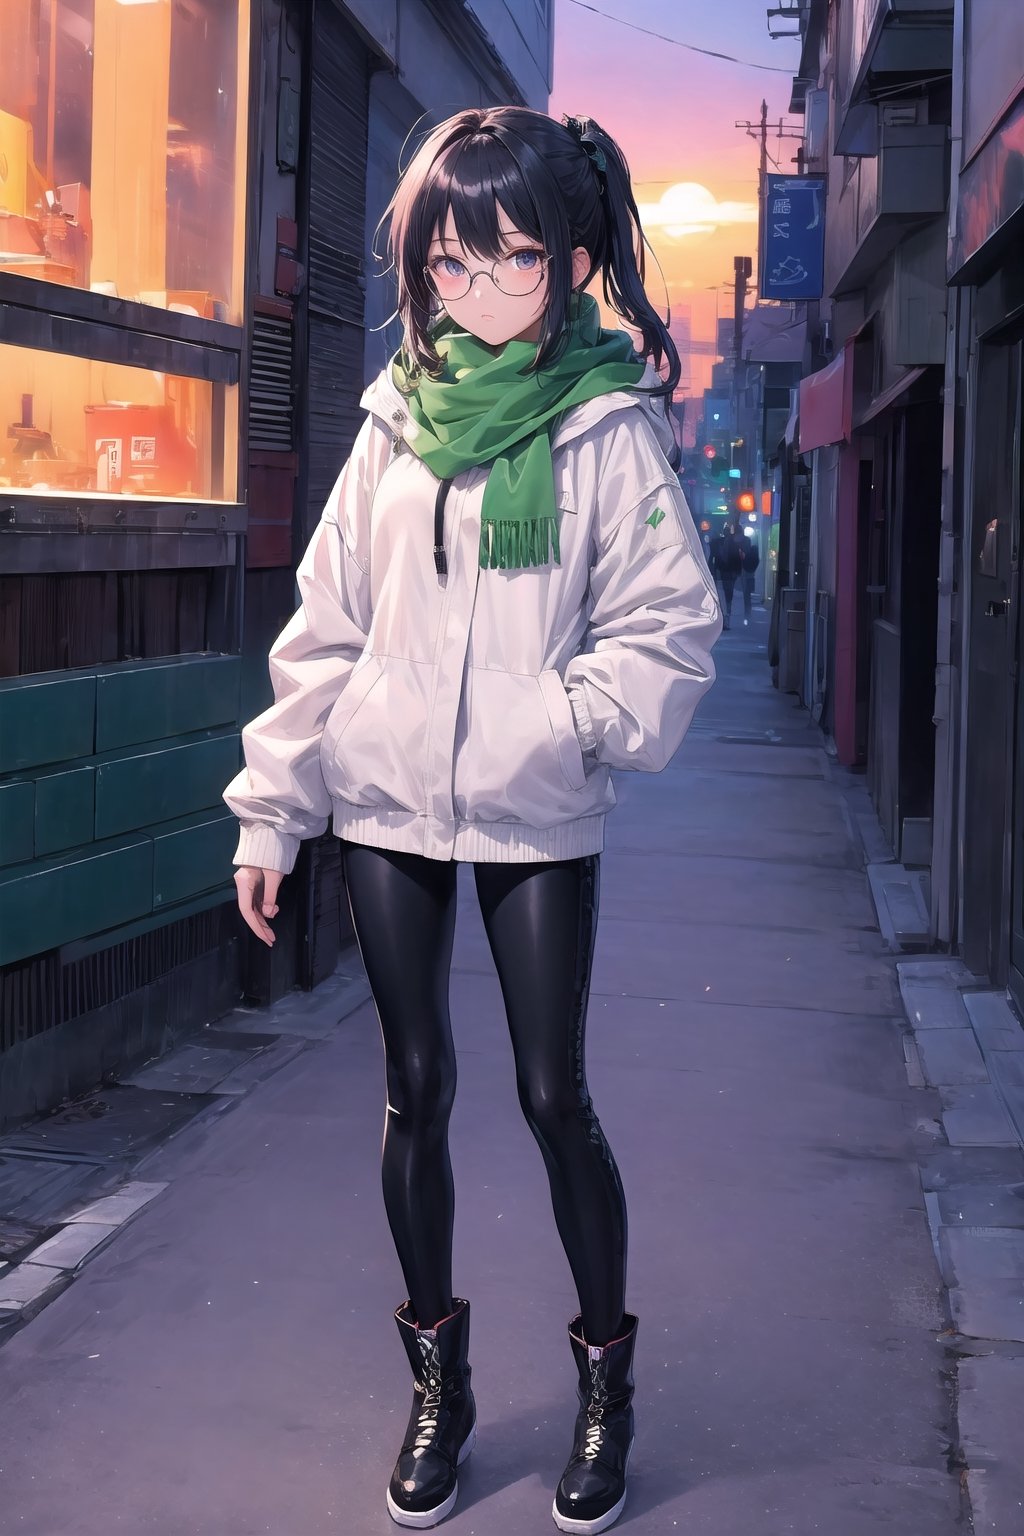 The picture shows a character wearing a white hooded jacket and black leggins. The character is wearing a green scarf that partially covers the lower part of his face. The background is neon sunset, creating a comfortable retro atmosphere. make anime girl. very detailed illustration, 8K. full body, boots, add milieu glasses that emphasise her stern look. Black hairs in ponytails